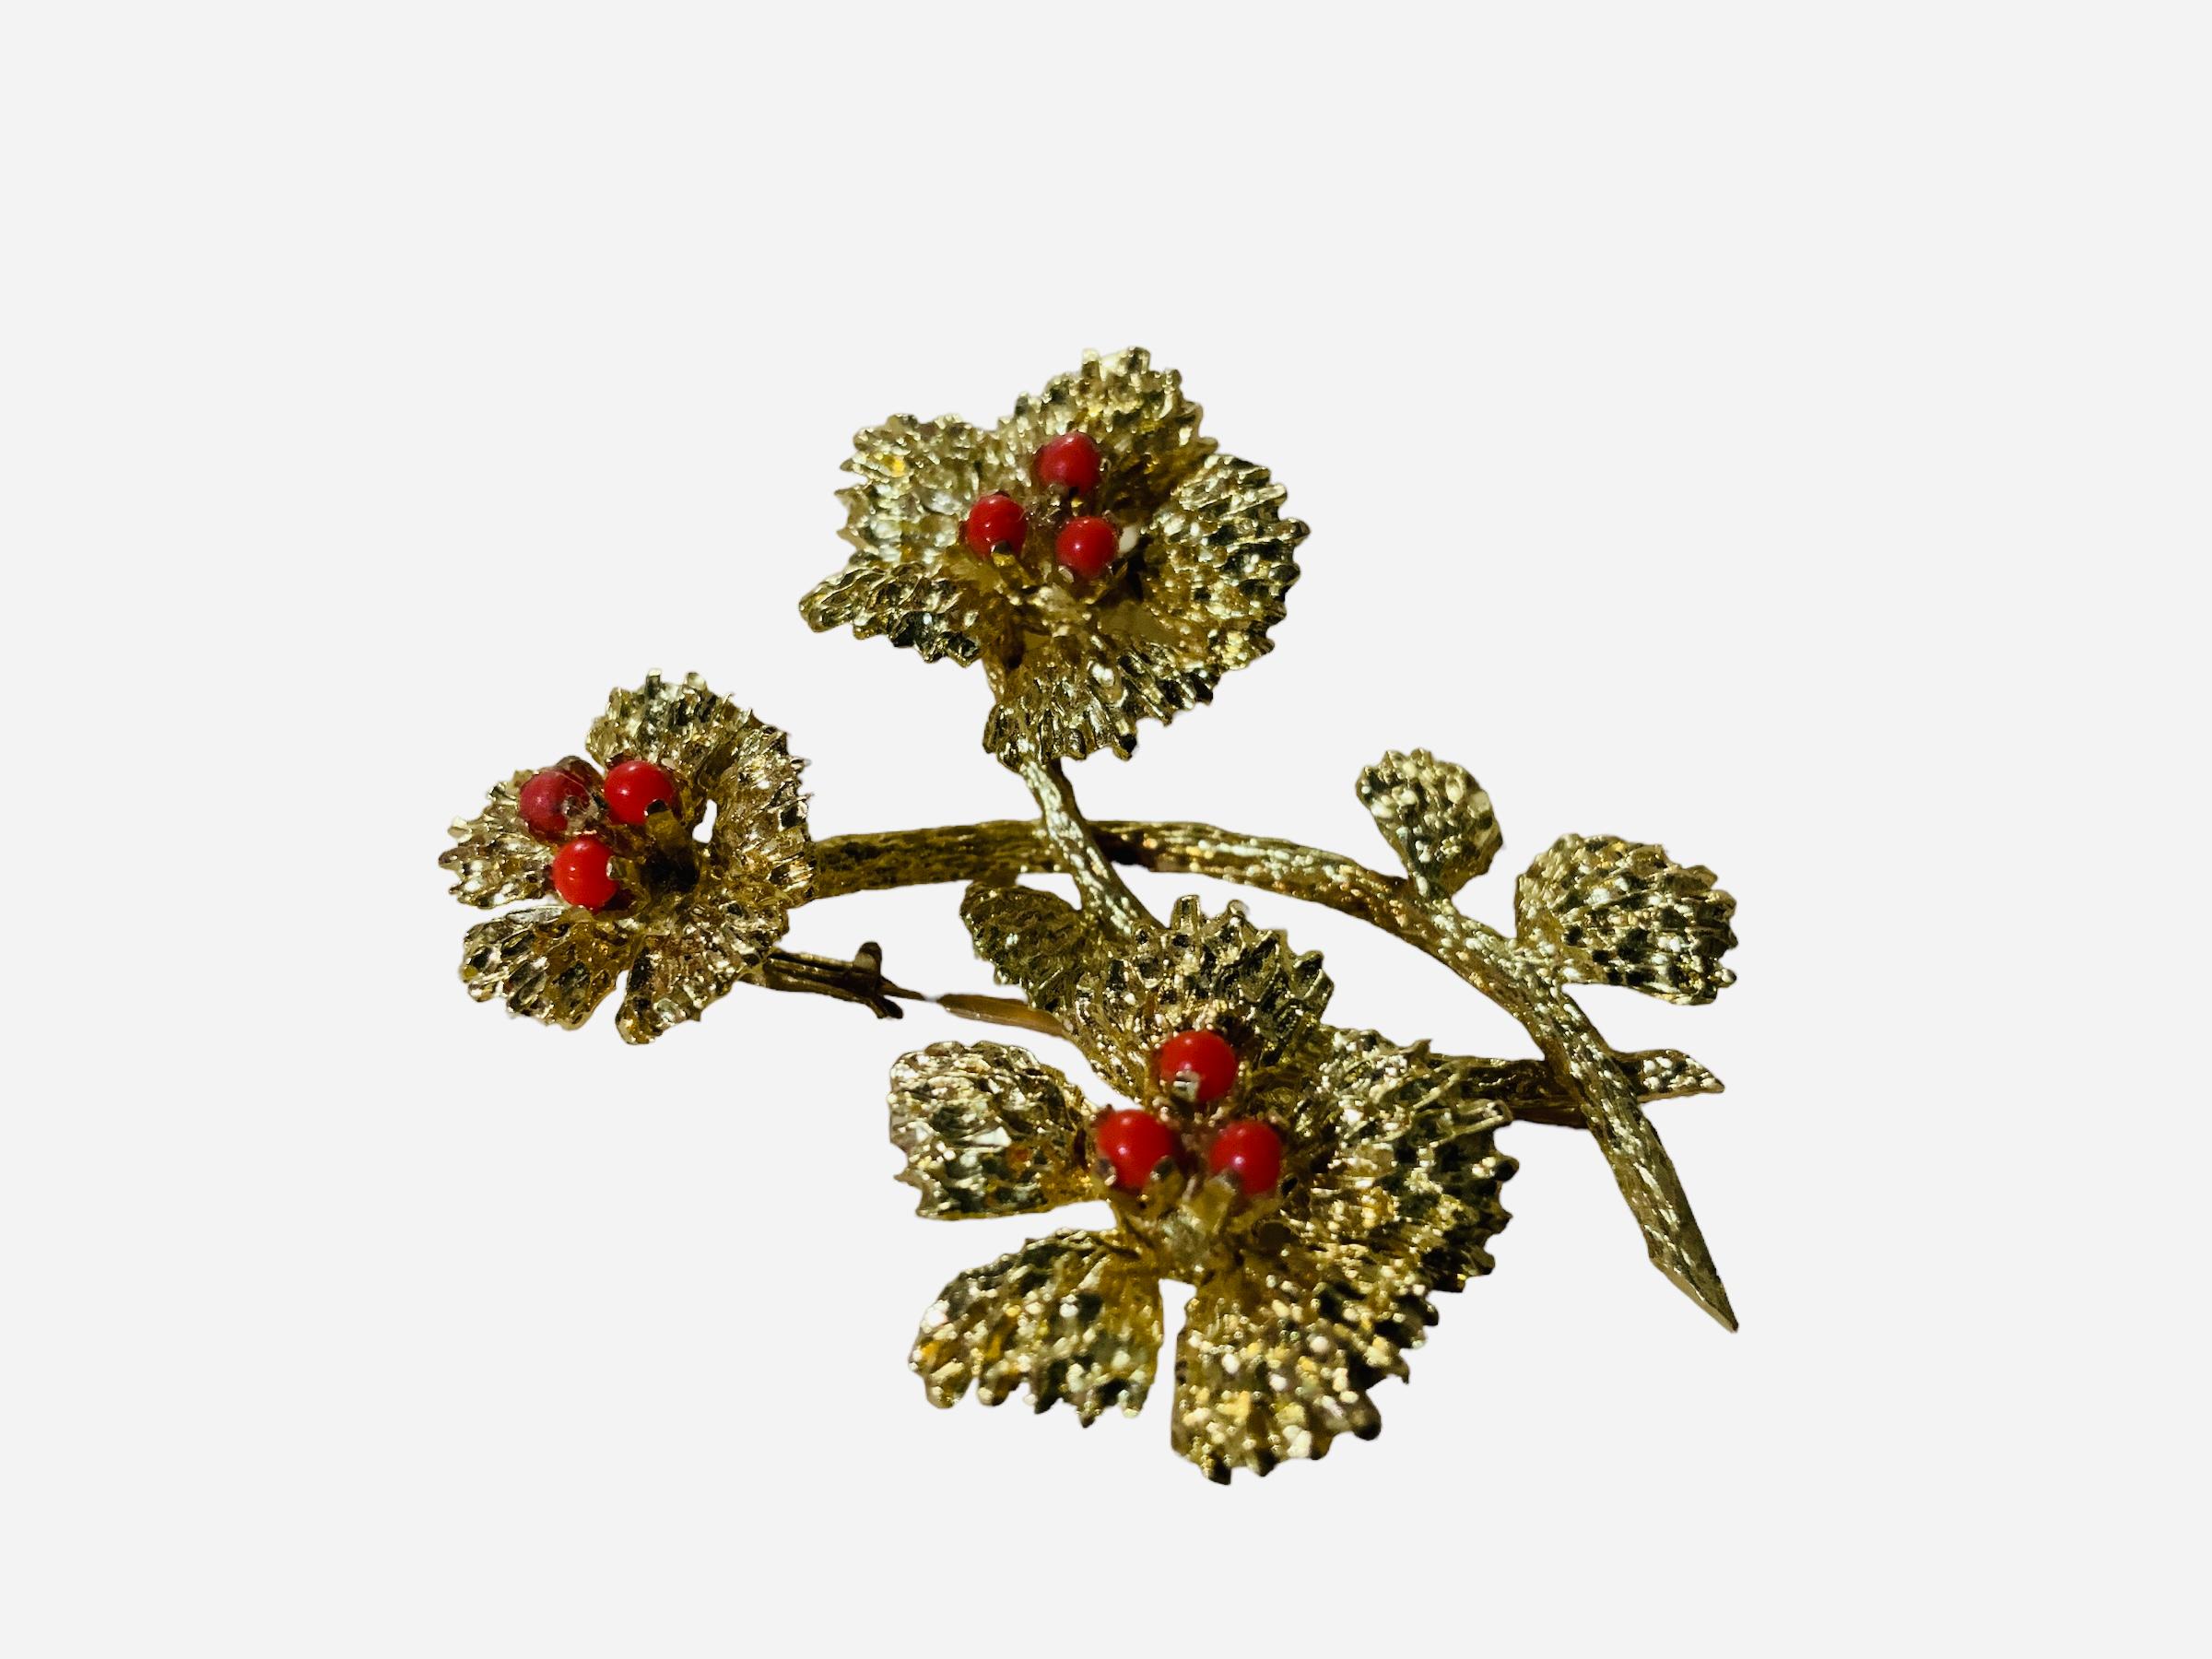 This is an 18K Gold and Coral Brooch. It depicts a yellow gold two branches with leaves and three flowers brooch. Each one of the flowers has five petals and are adorned with three coral beads. The brooch has a trombone clasp. It is hallmarked 18k.